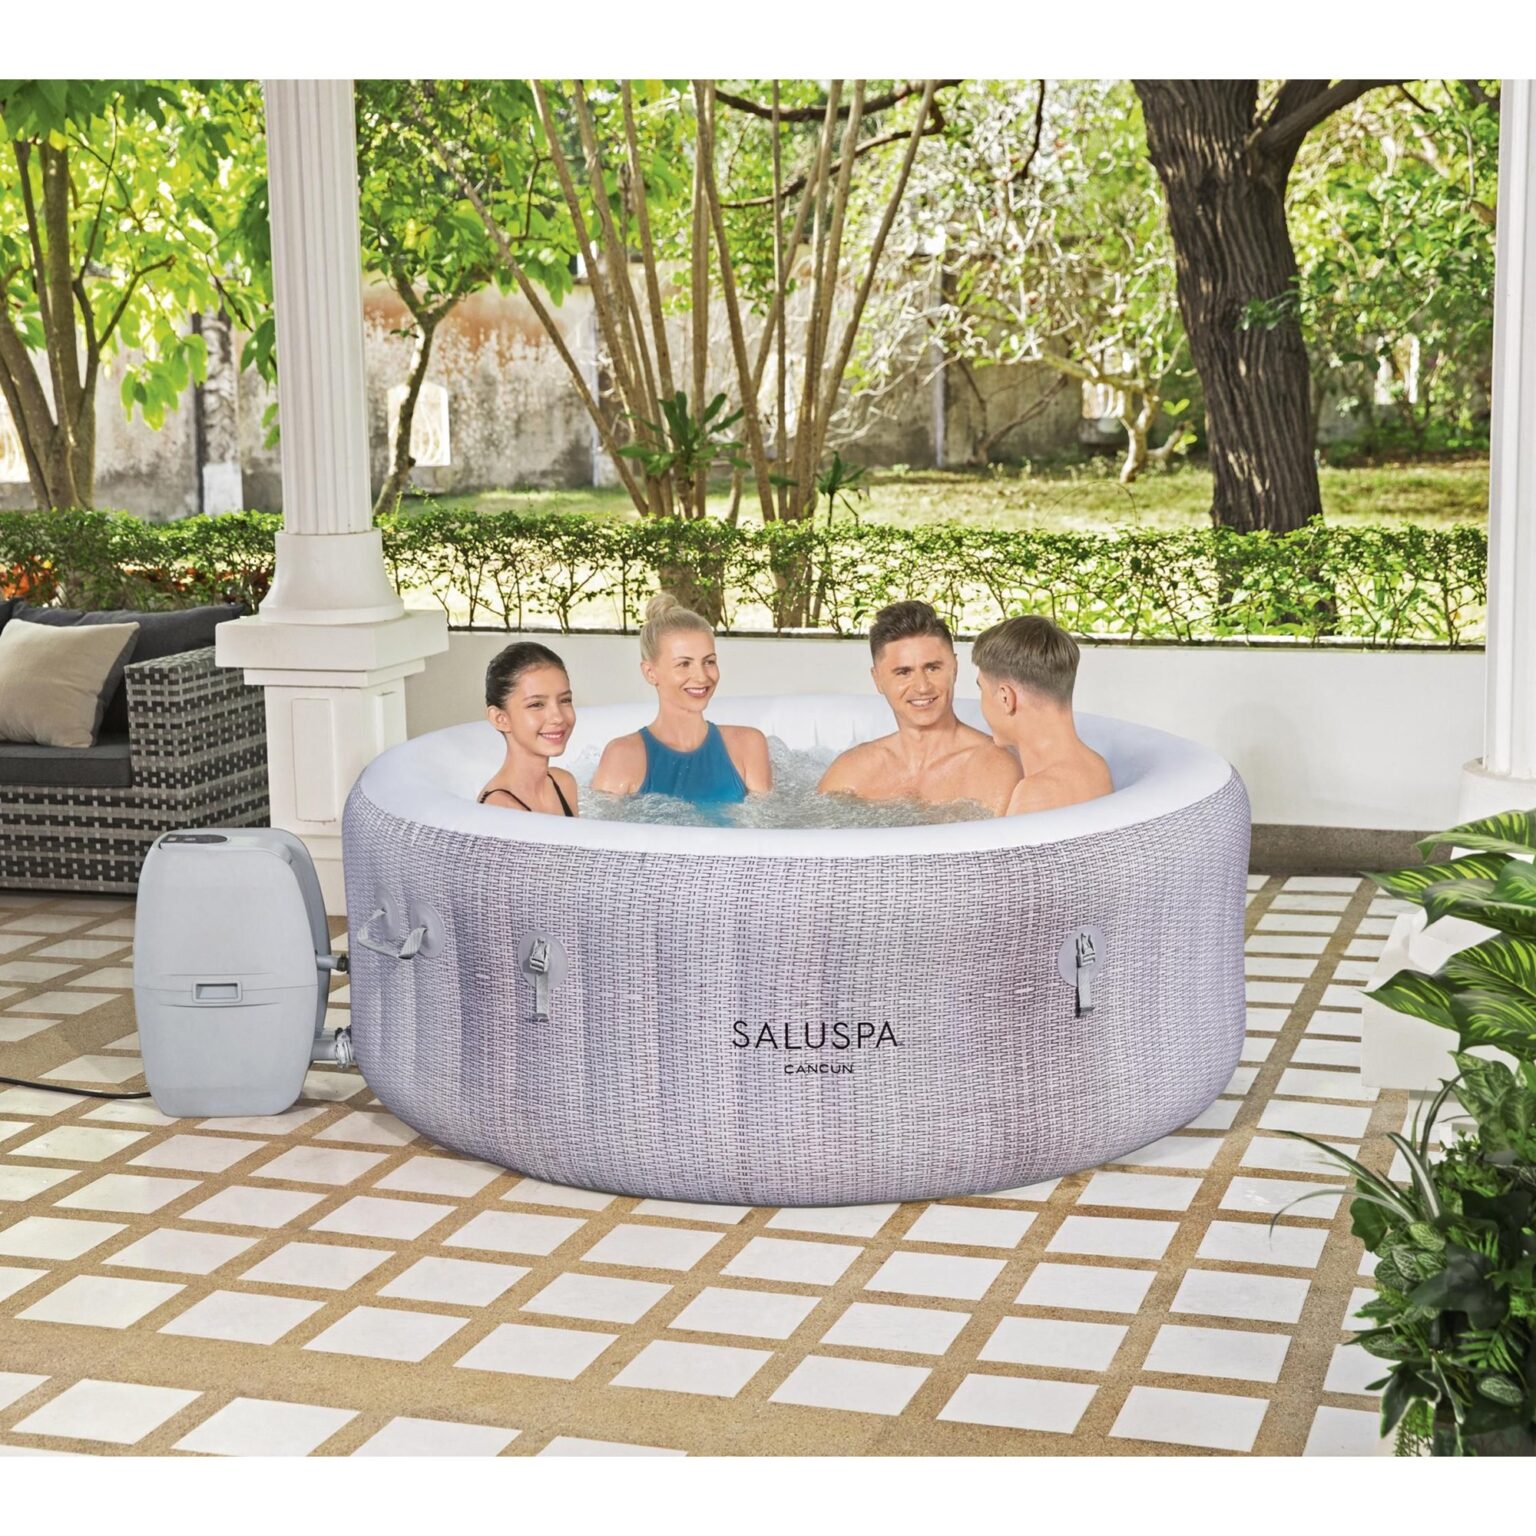 Bestway Cancun Saluspa 4 Person Inflatable Round Hot Tub With 120 Airjets